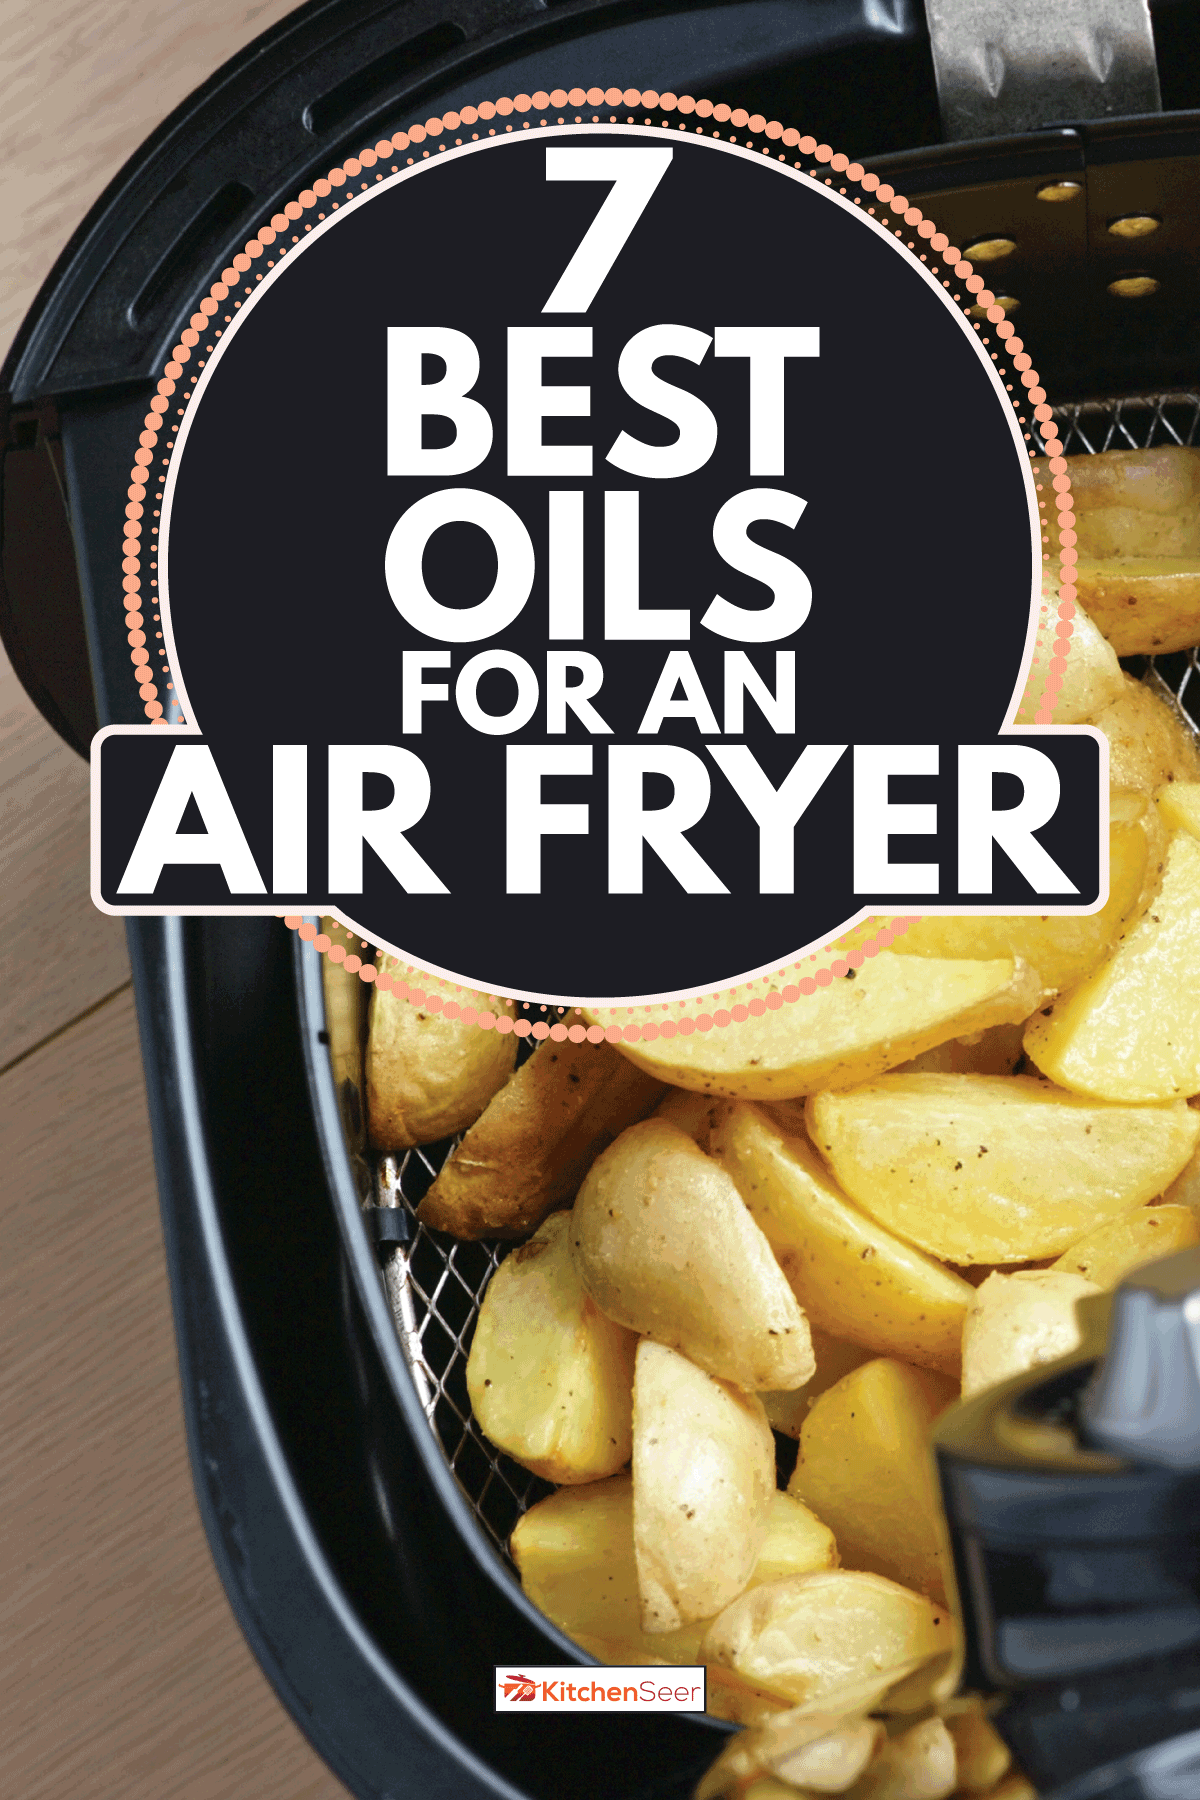 Air fryer grill potato at home with oil, 7 Best Oils For An Air Fryer